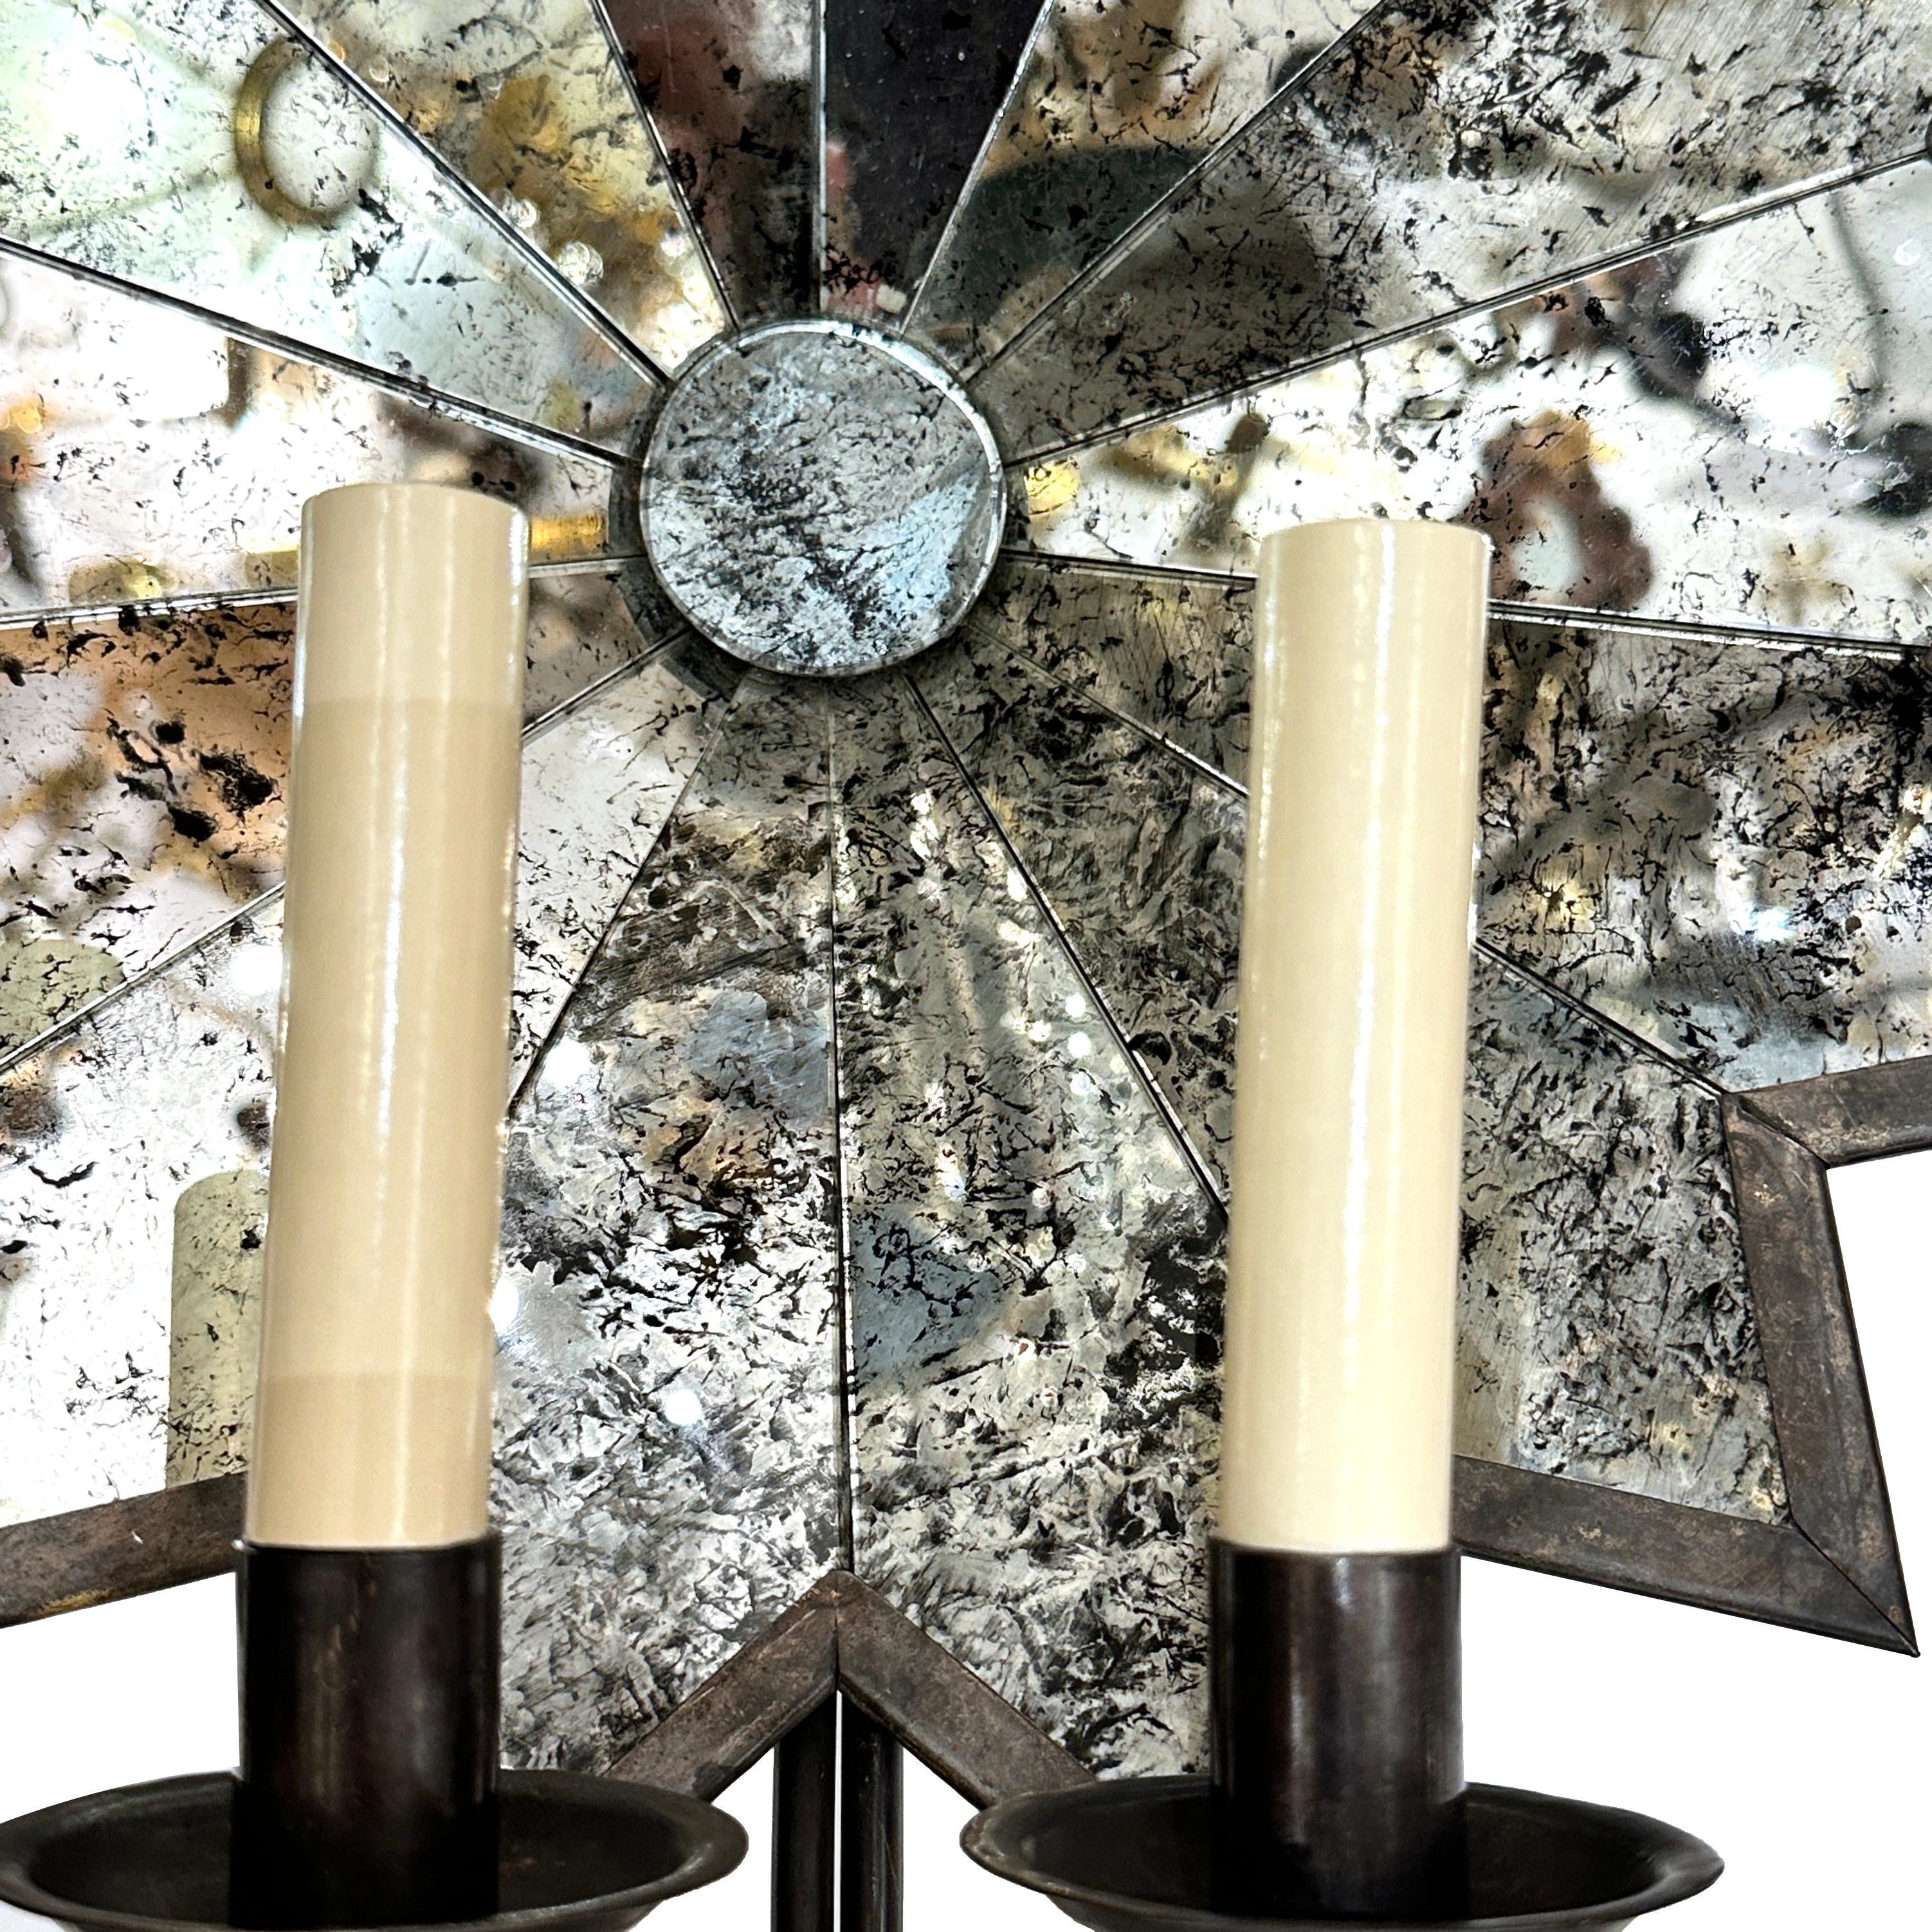 A set of circa 1950's French mirrored sconces with 2 lights. Sold per pair.

Measurements:
Height: 17